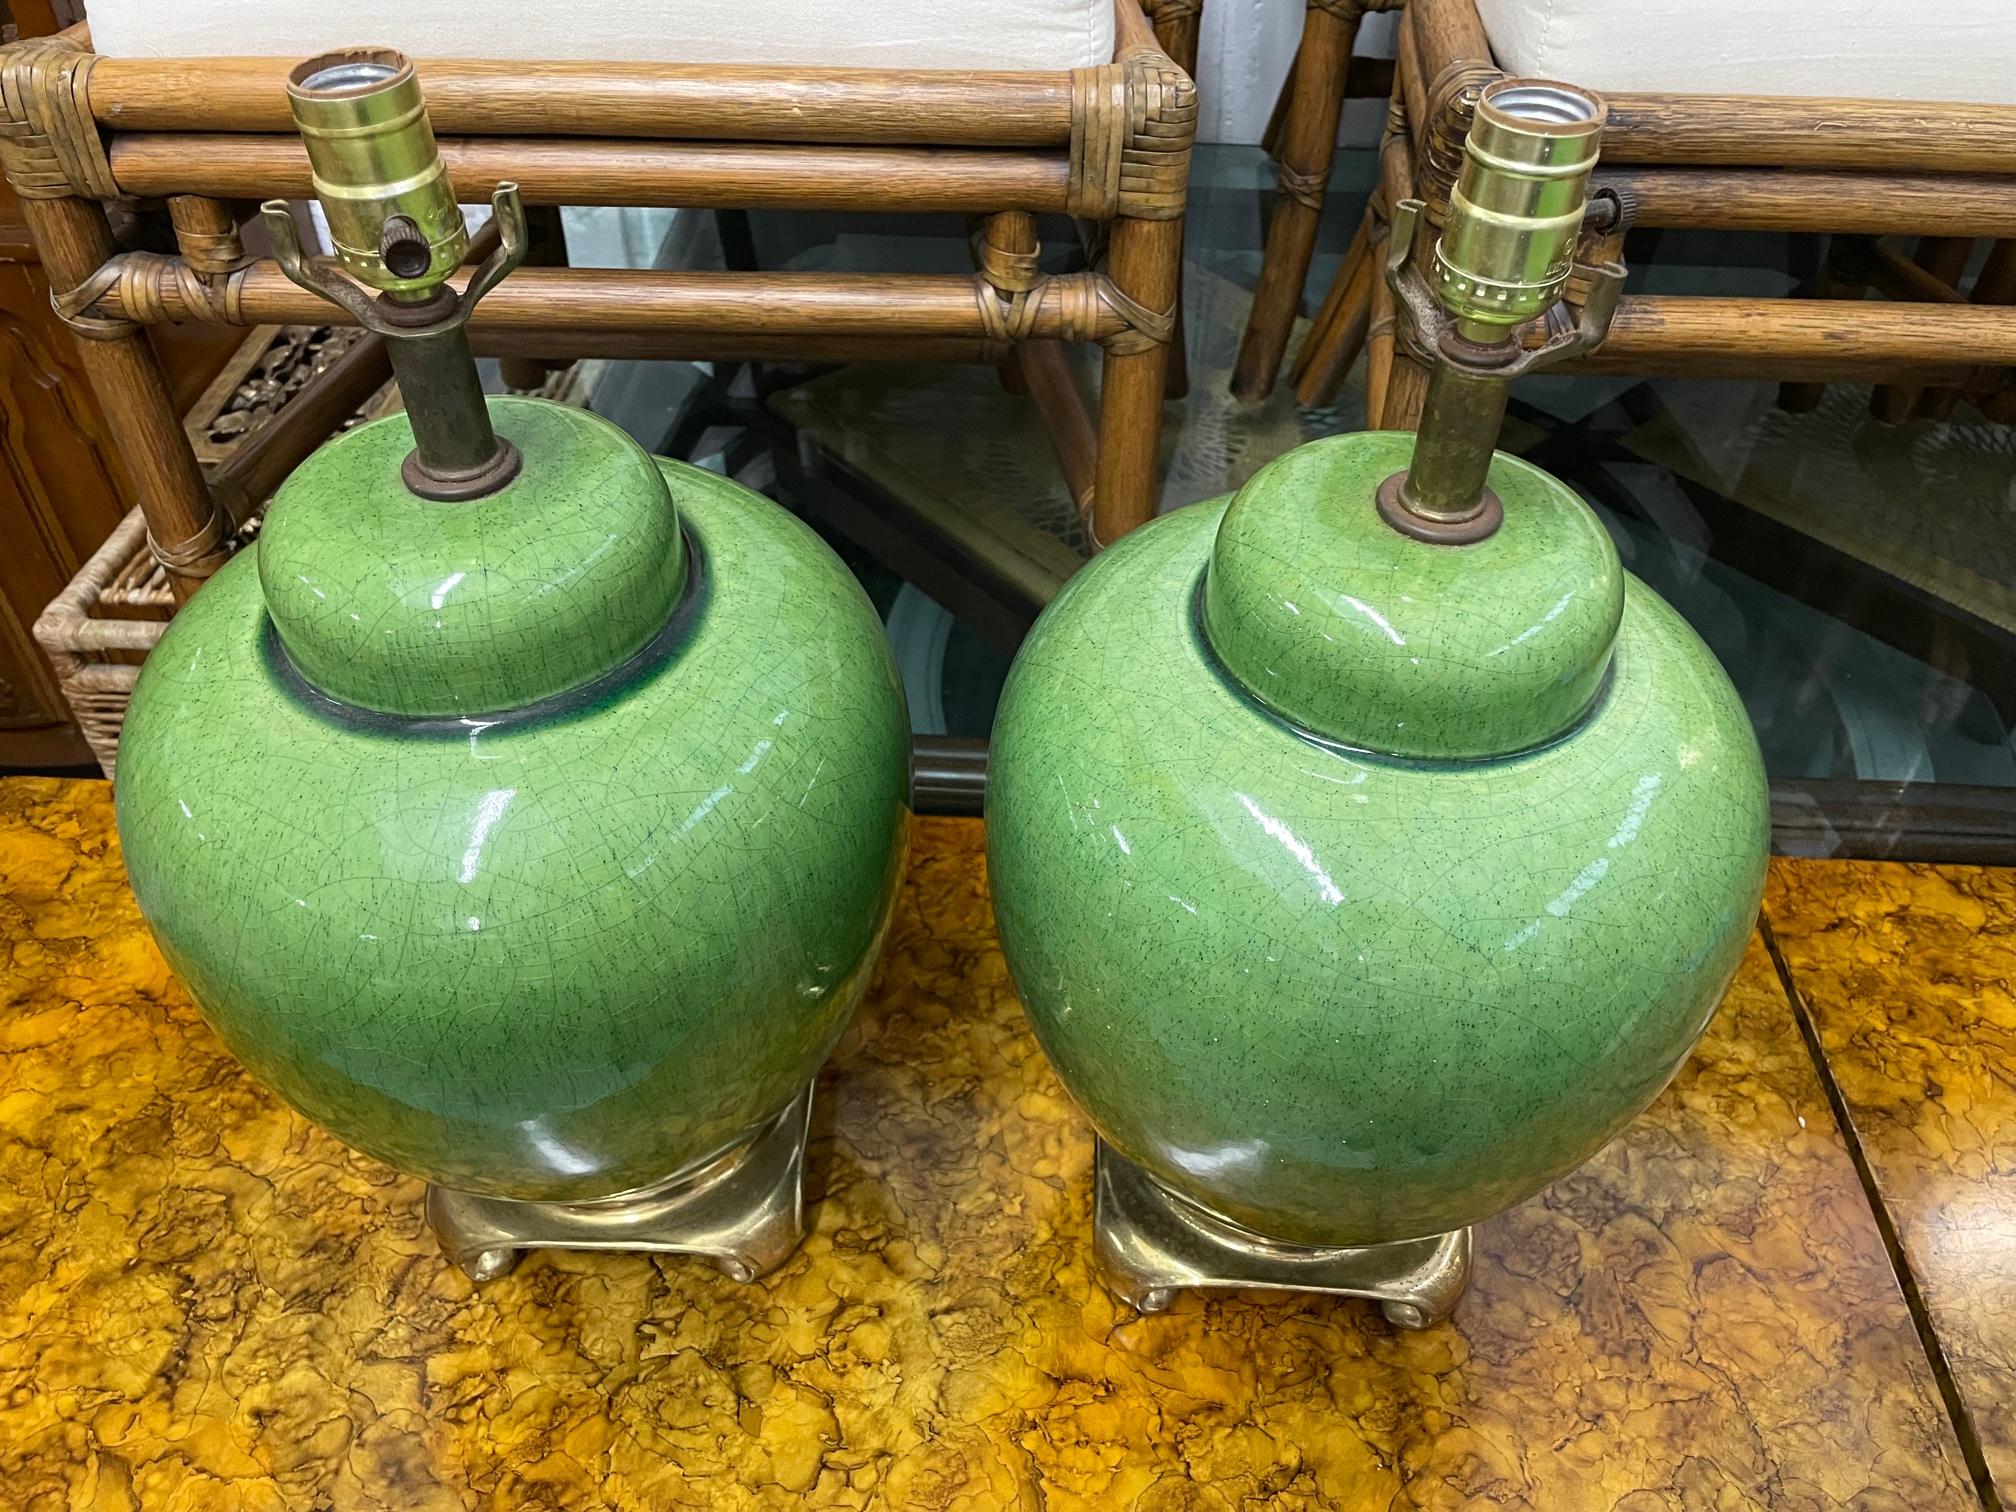 Pair of mid-century ceramic ginger jar table lamps by Nathan Lagin feature brass bases and a beautiful jade finish. Very good condition with only minor imperfections consistent with age. Shades not included.